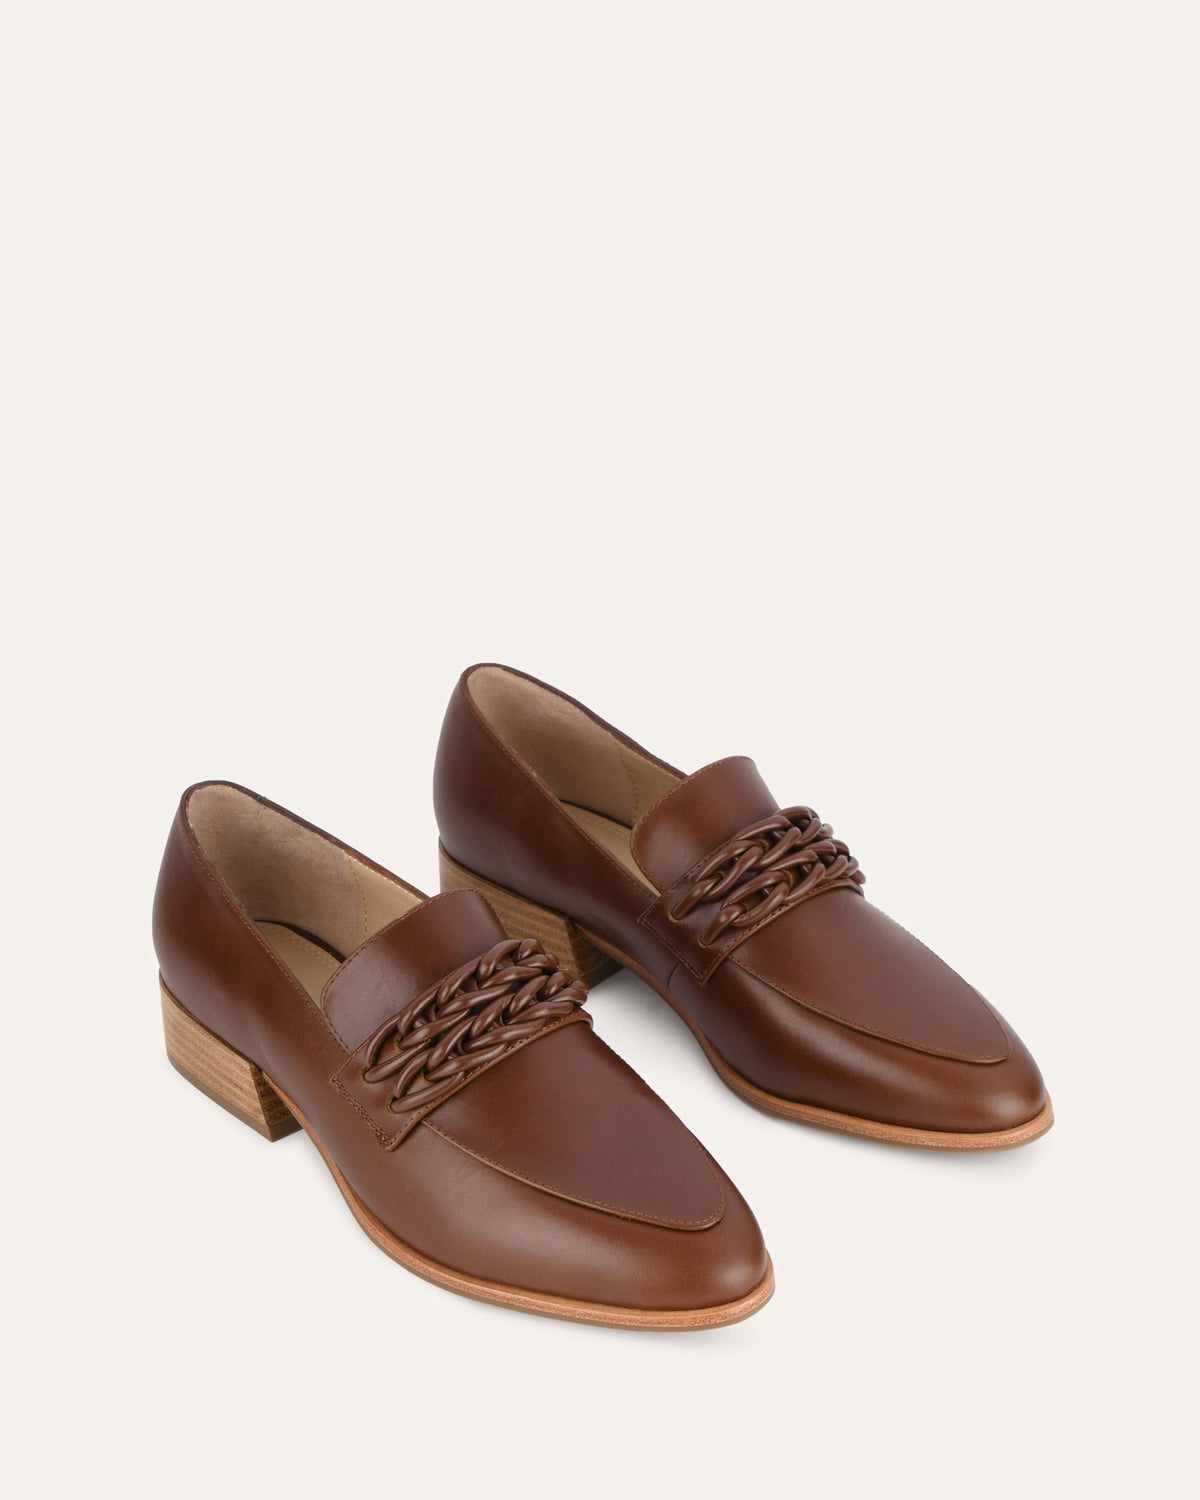 XIMENA LOAFERS CHOCOLATE LEATHER